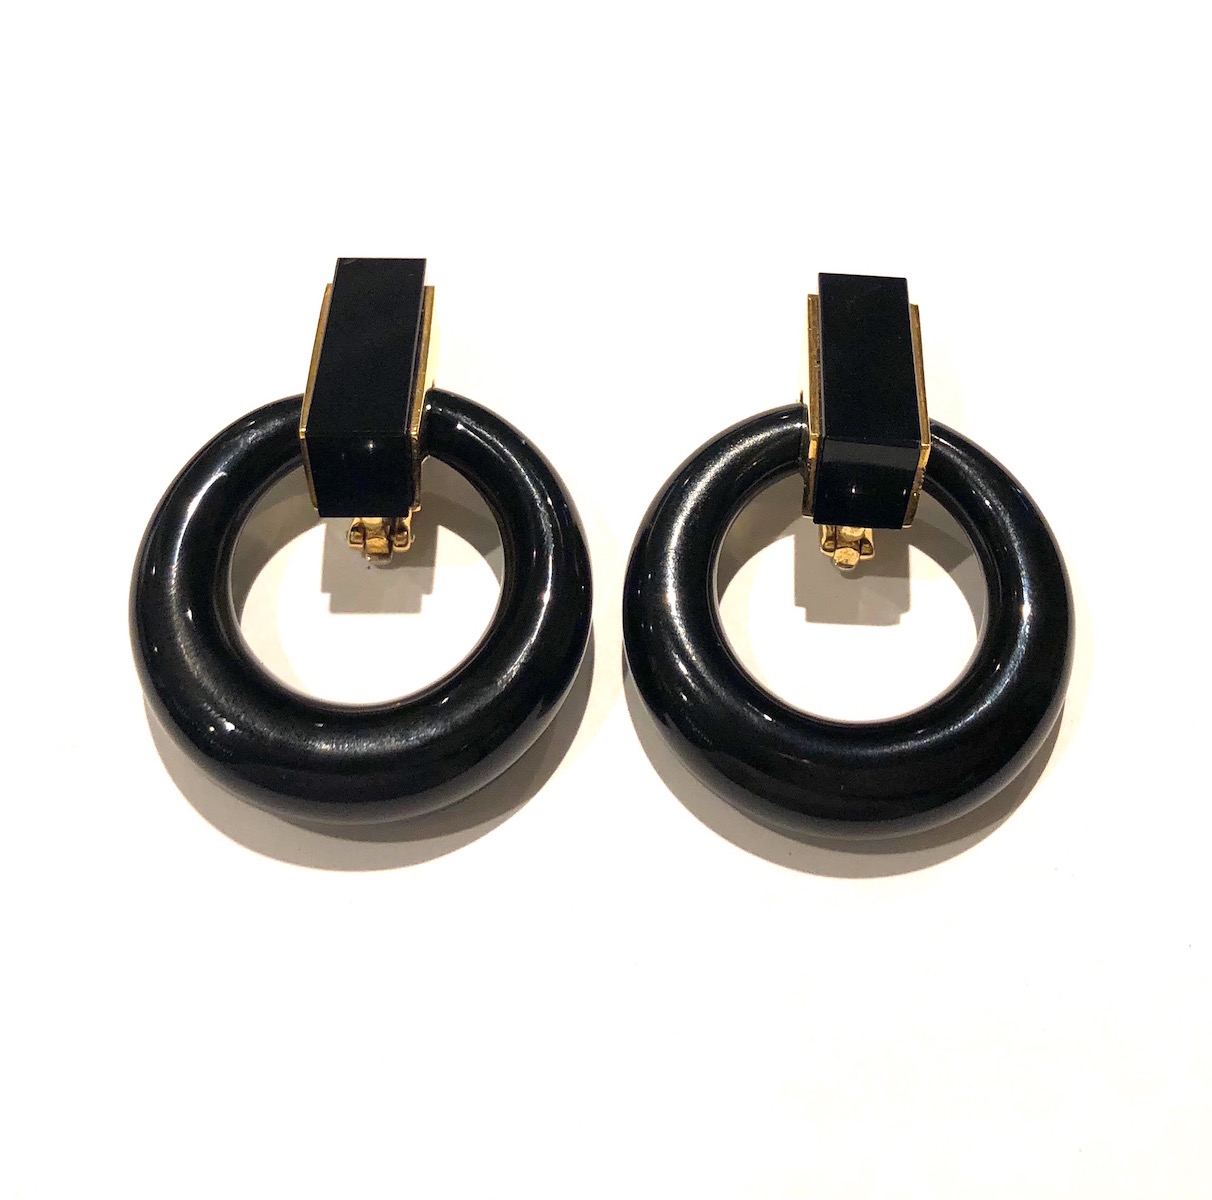 American 1960’s classic “Door Knocker / Hoop” earrings, carved, contoured and polished onyx with 18k gold side plate details and clip backs, Marked: 18k (2x), c. 1960’s